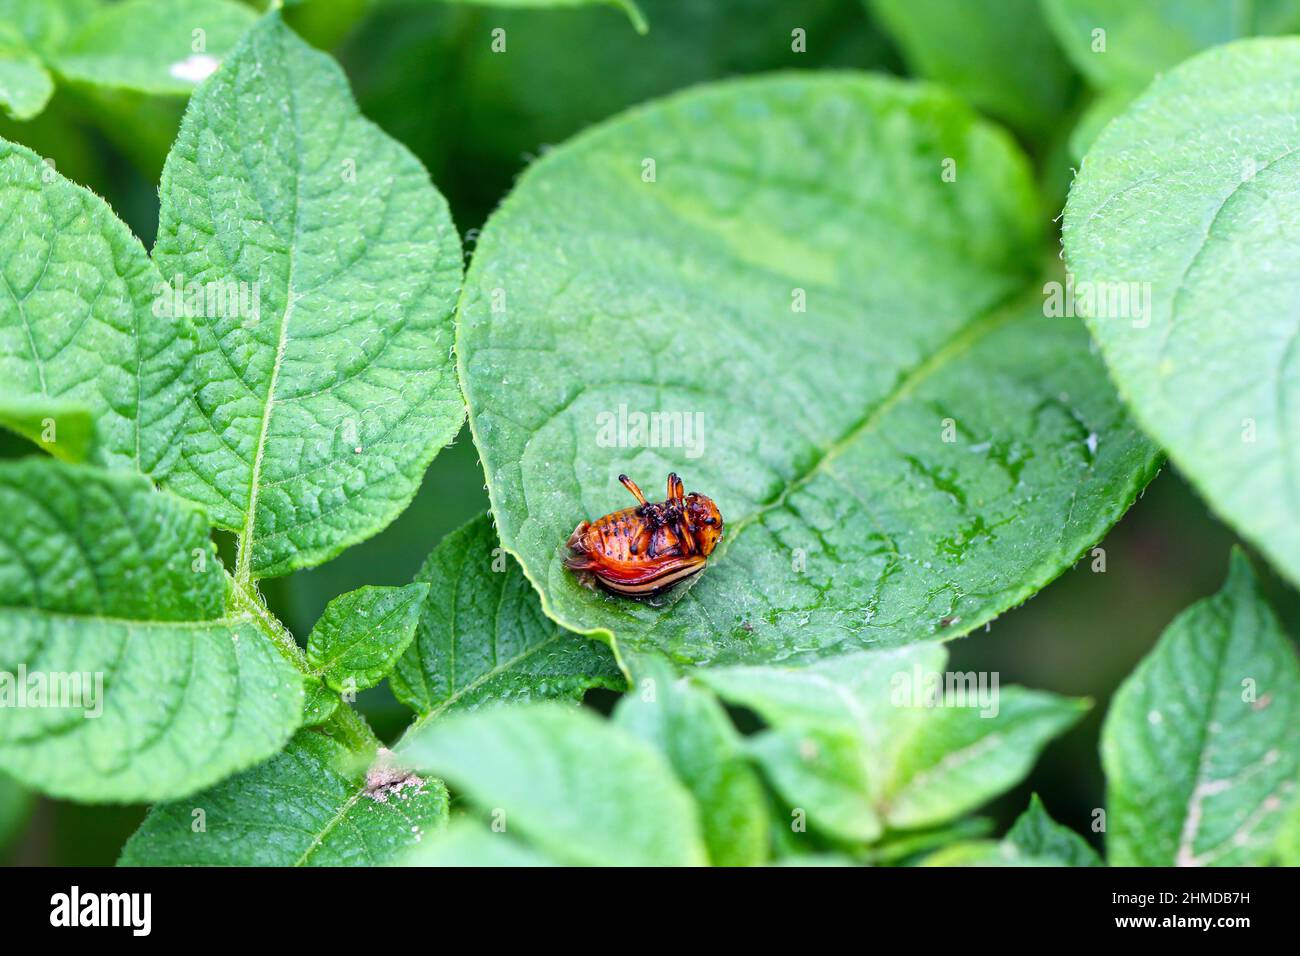 Dead potato beetle on a potato leaf after insecticide treatment. Stock Photo